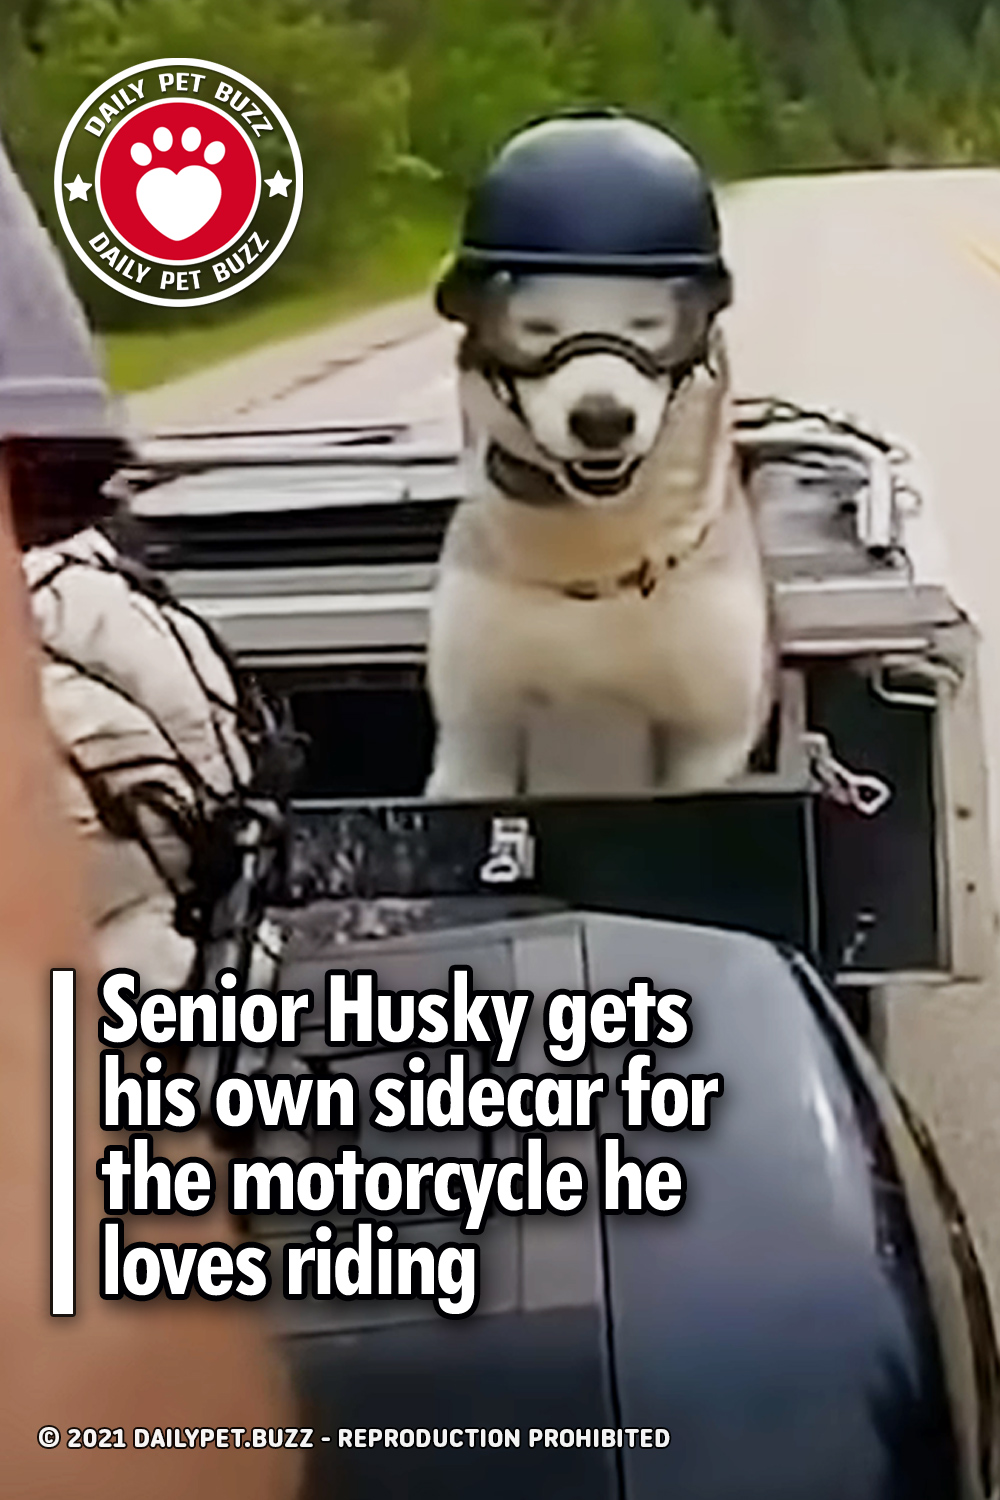 Senior Husky gets his own sidecar for the motorcycle he loves riding